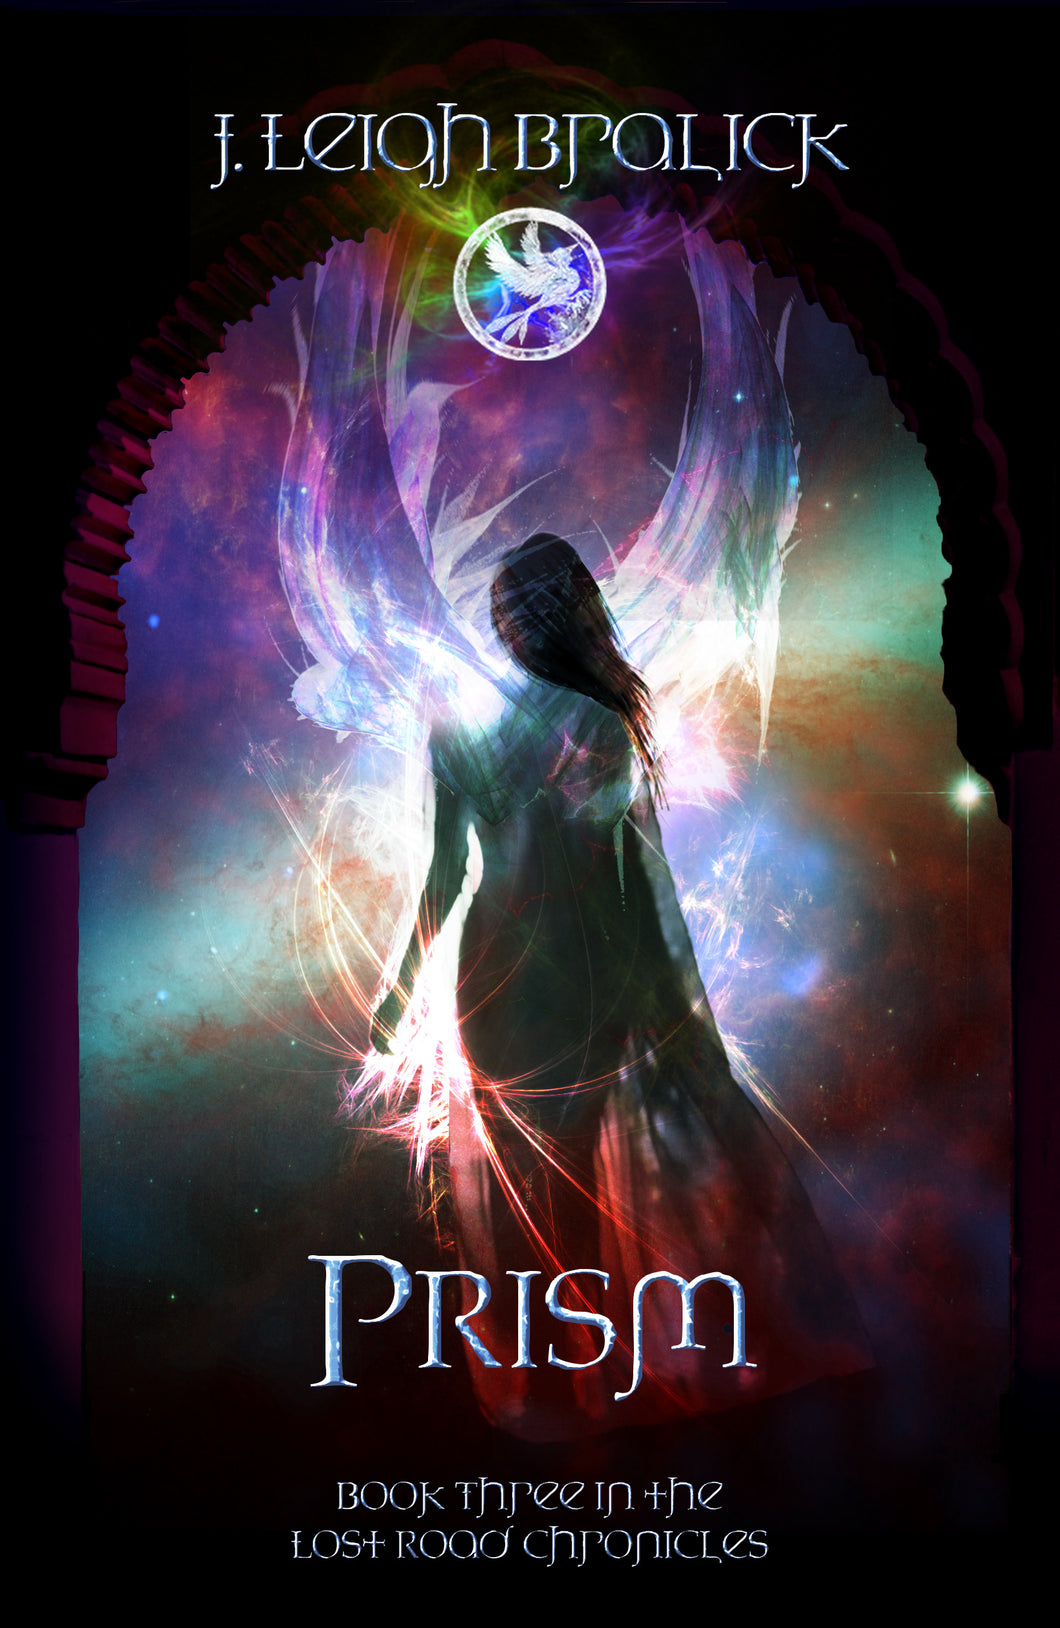 Prism (Lost Road Chronicles #3)